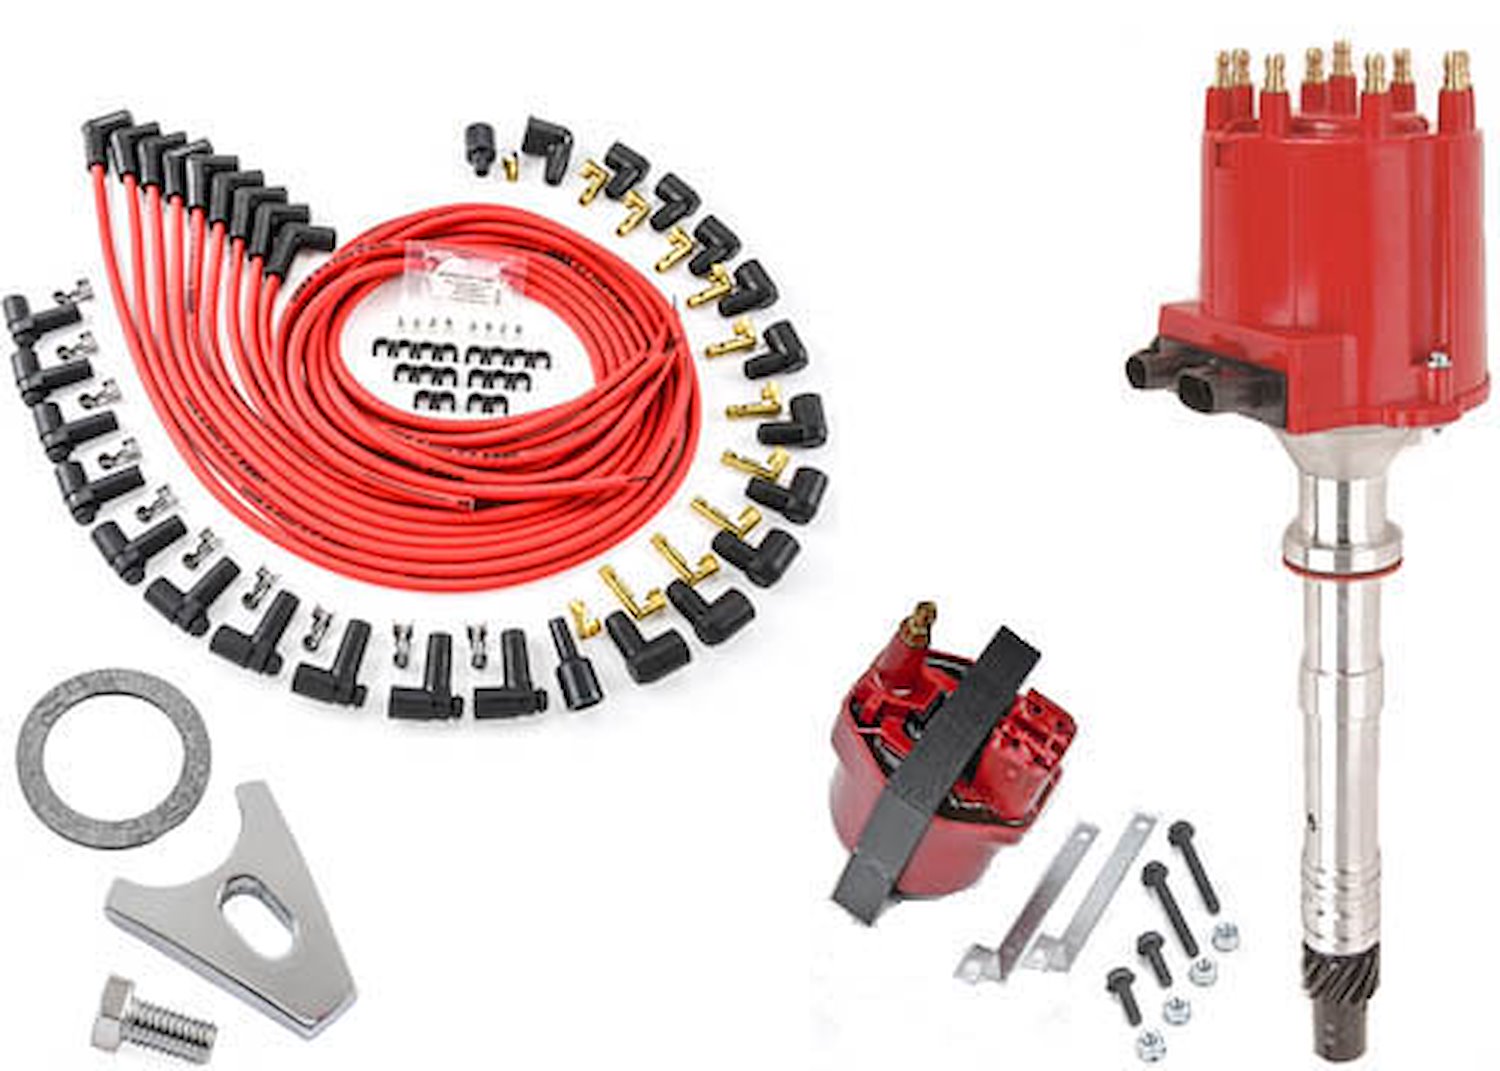 Distributor, Spark Plug Wires and Coil Kit